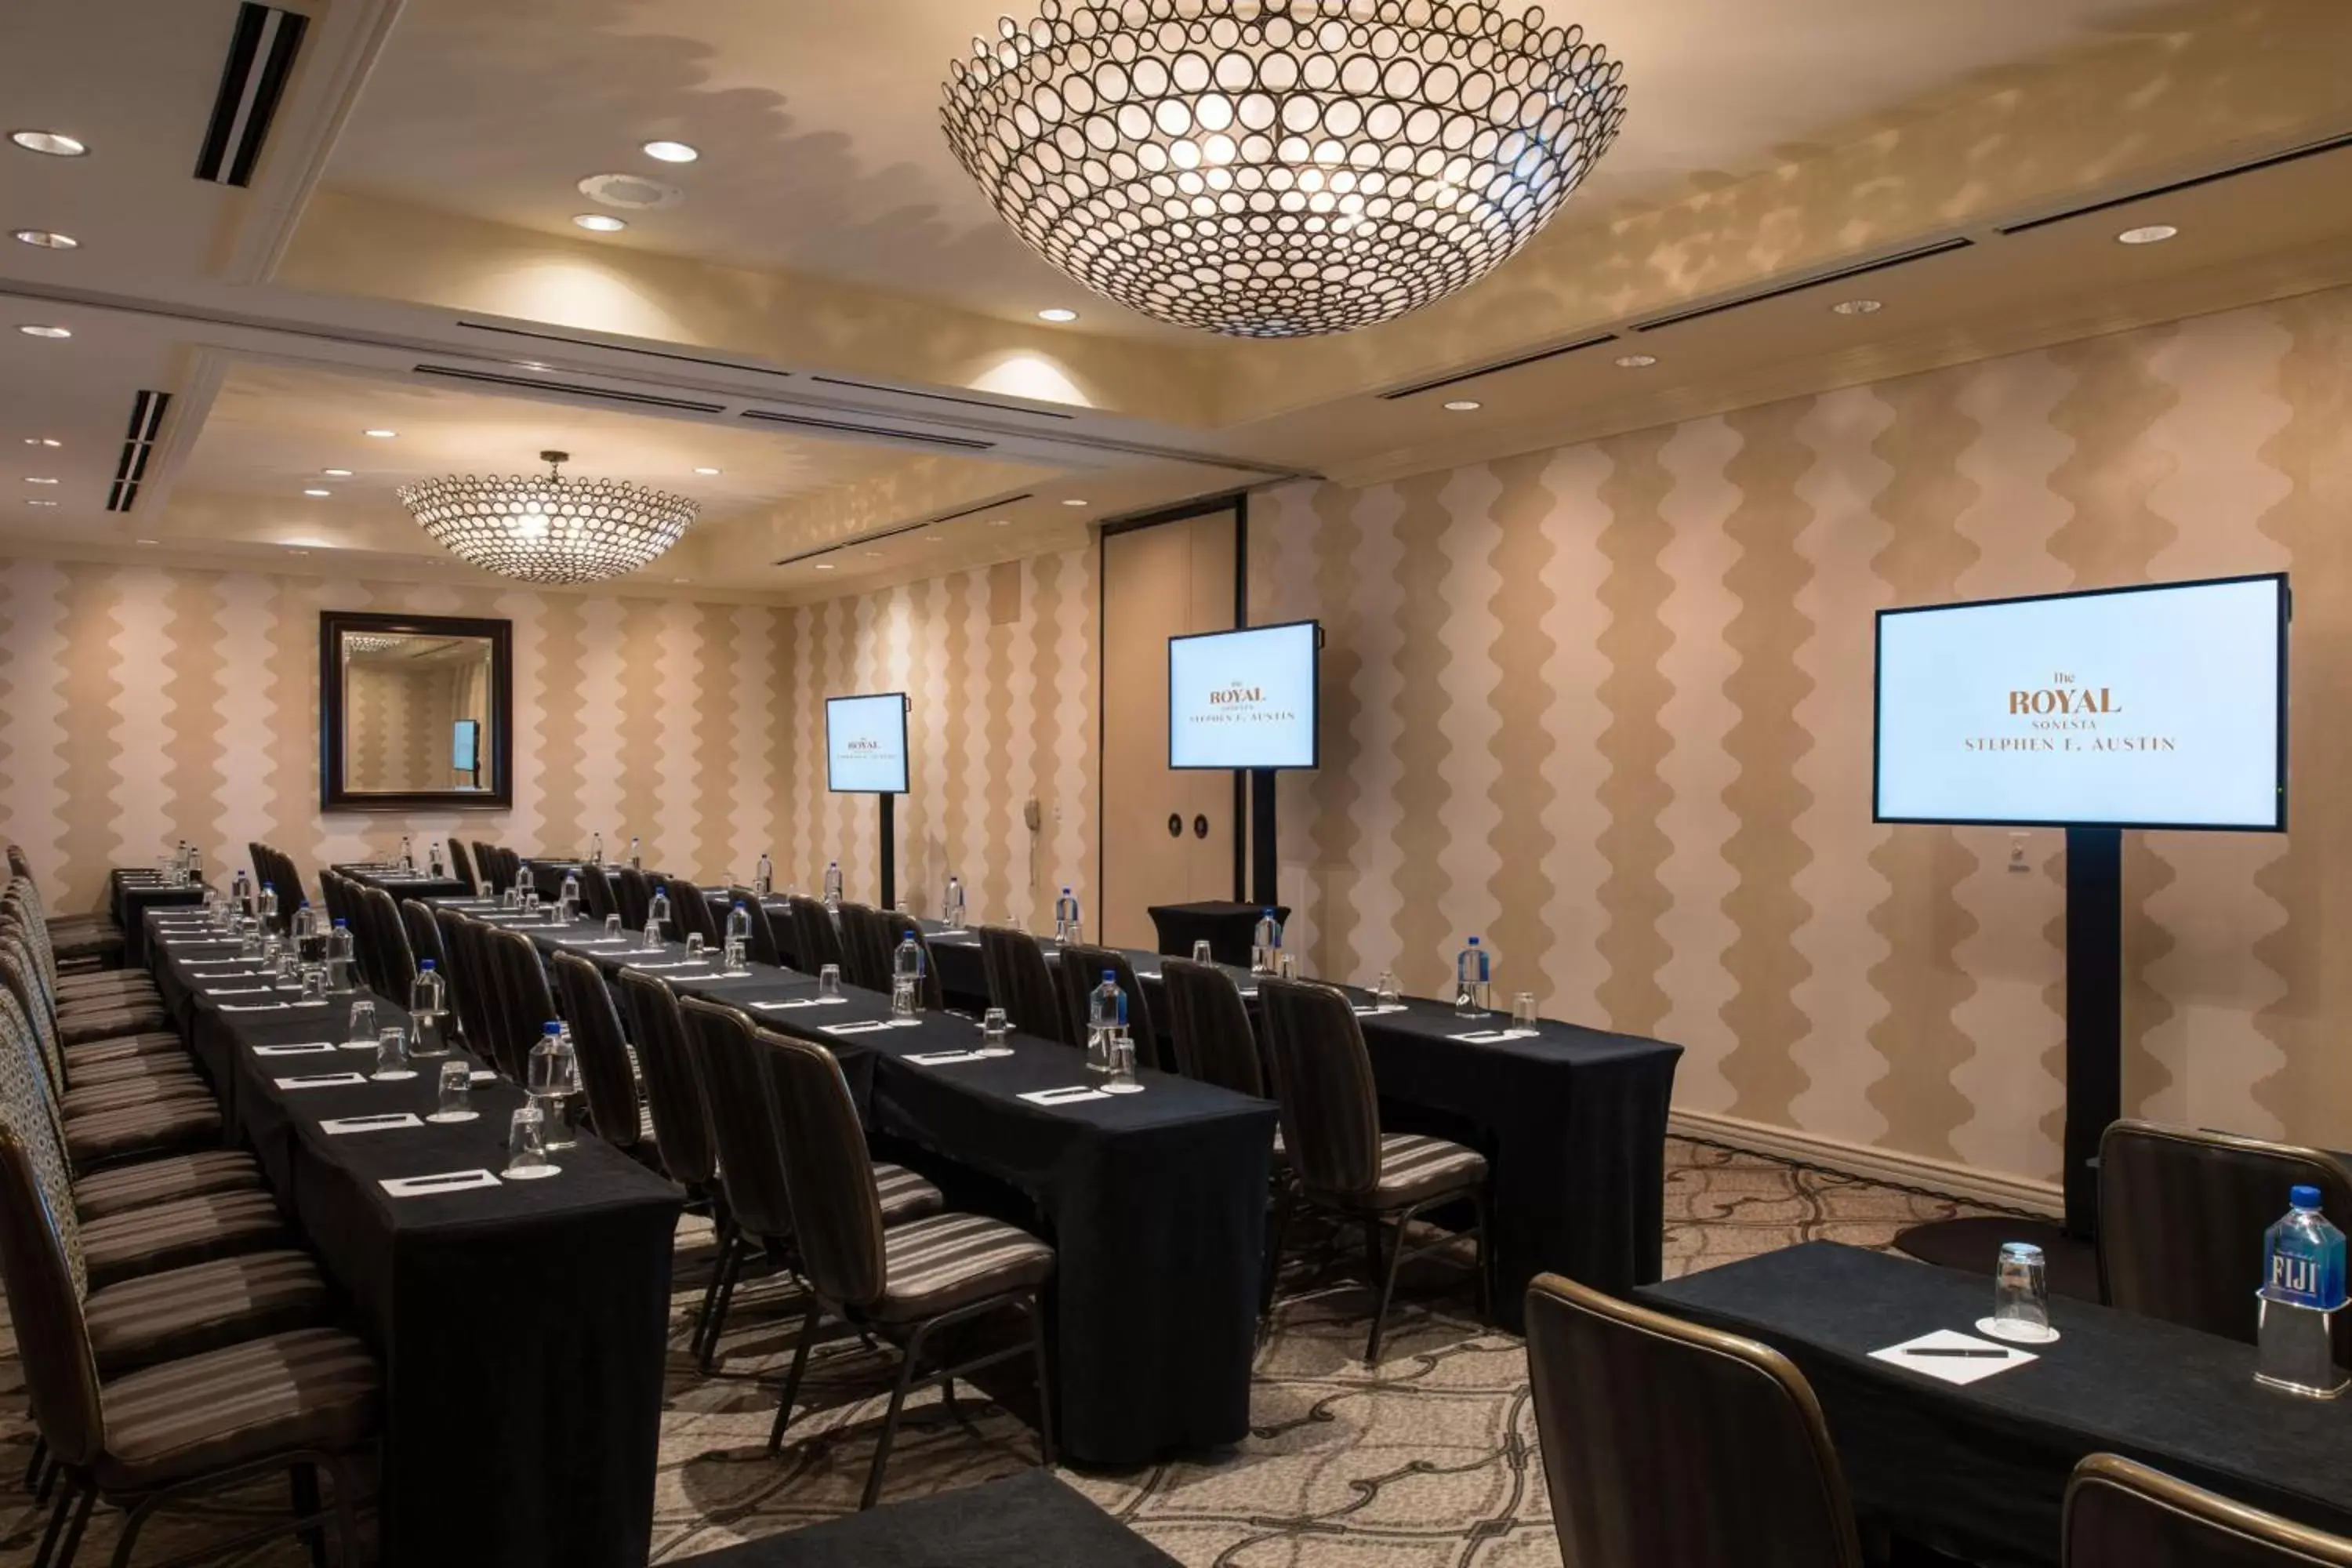 Meeting/conference room in The Stephen F Austin Royal Sonesta Hotel